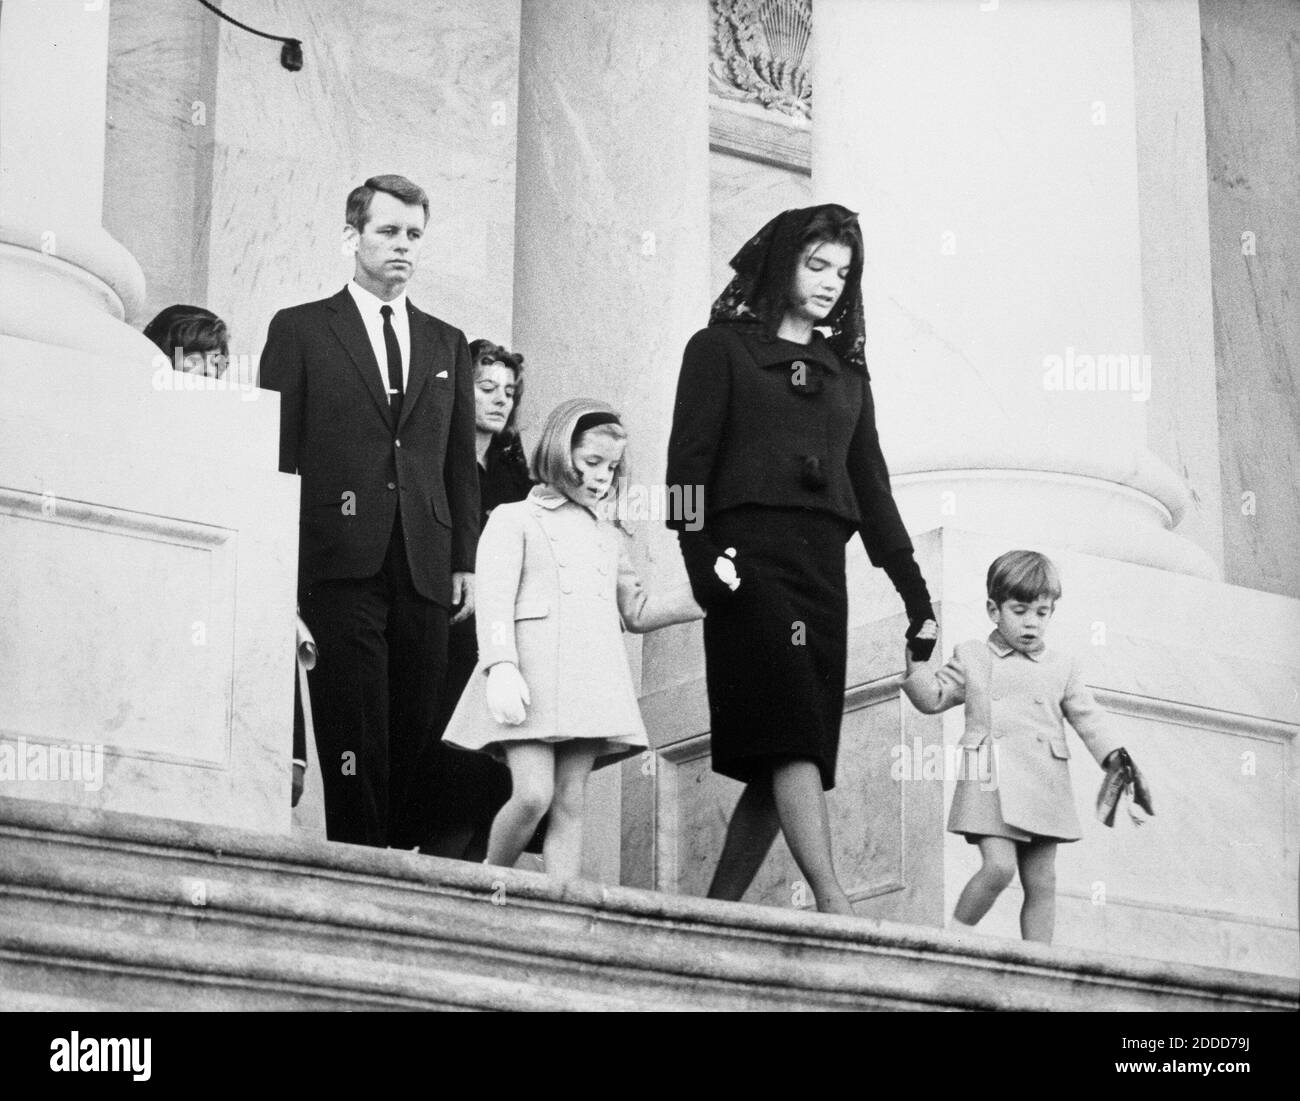 NO FILM, NO VIDEO, NO TV, NO DOCUMENTARY - Kennedy family members leave a memorial ceremony for President John F. Kennedy at the U.S. Capitol building in Washington, D.C., on Nov. 24. Family members include Robert F. Kennedy, Patricia Lawford, Caroline Kennedy, former first lady Jacqueline Kennedy and John F. Kennedy, Jr. Photo by Abbie Rowe/National Parks Service/John F. Kennedy Presidential Library and Museum/MCT/ABACAPRESS.COM Stock Photo